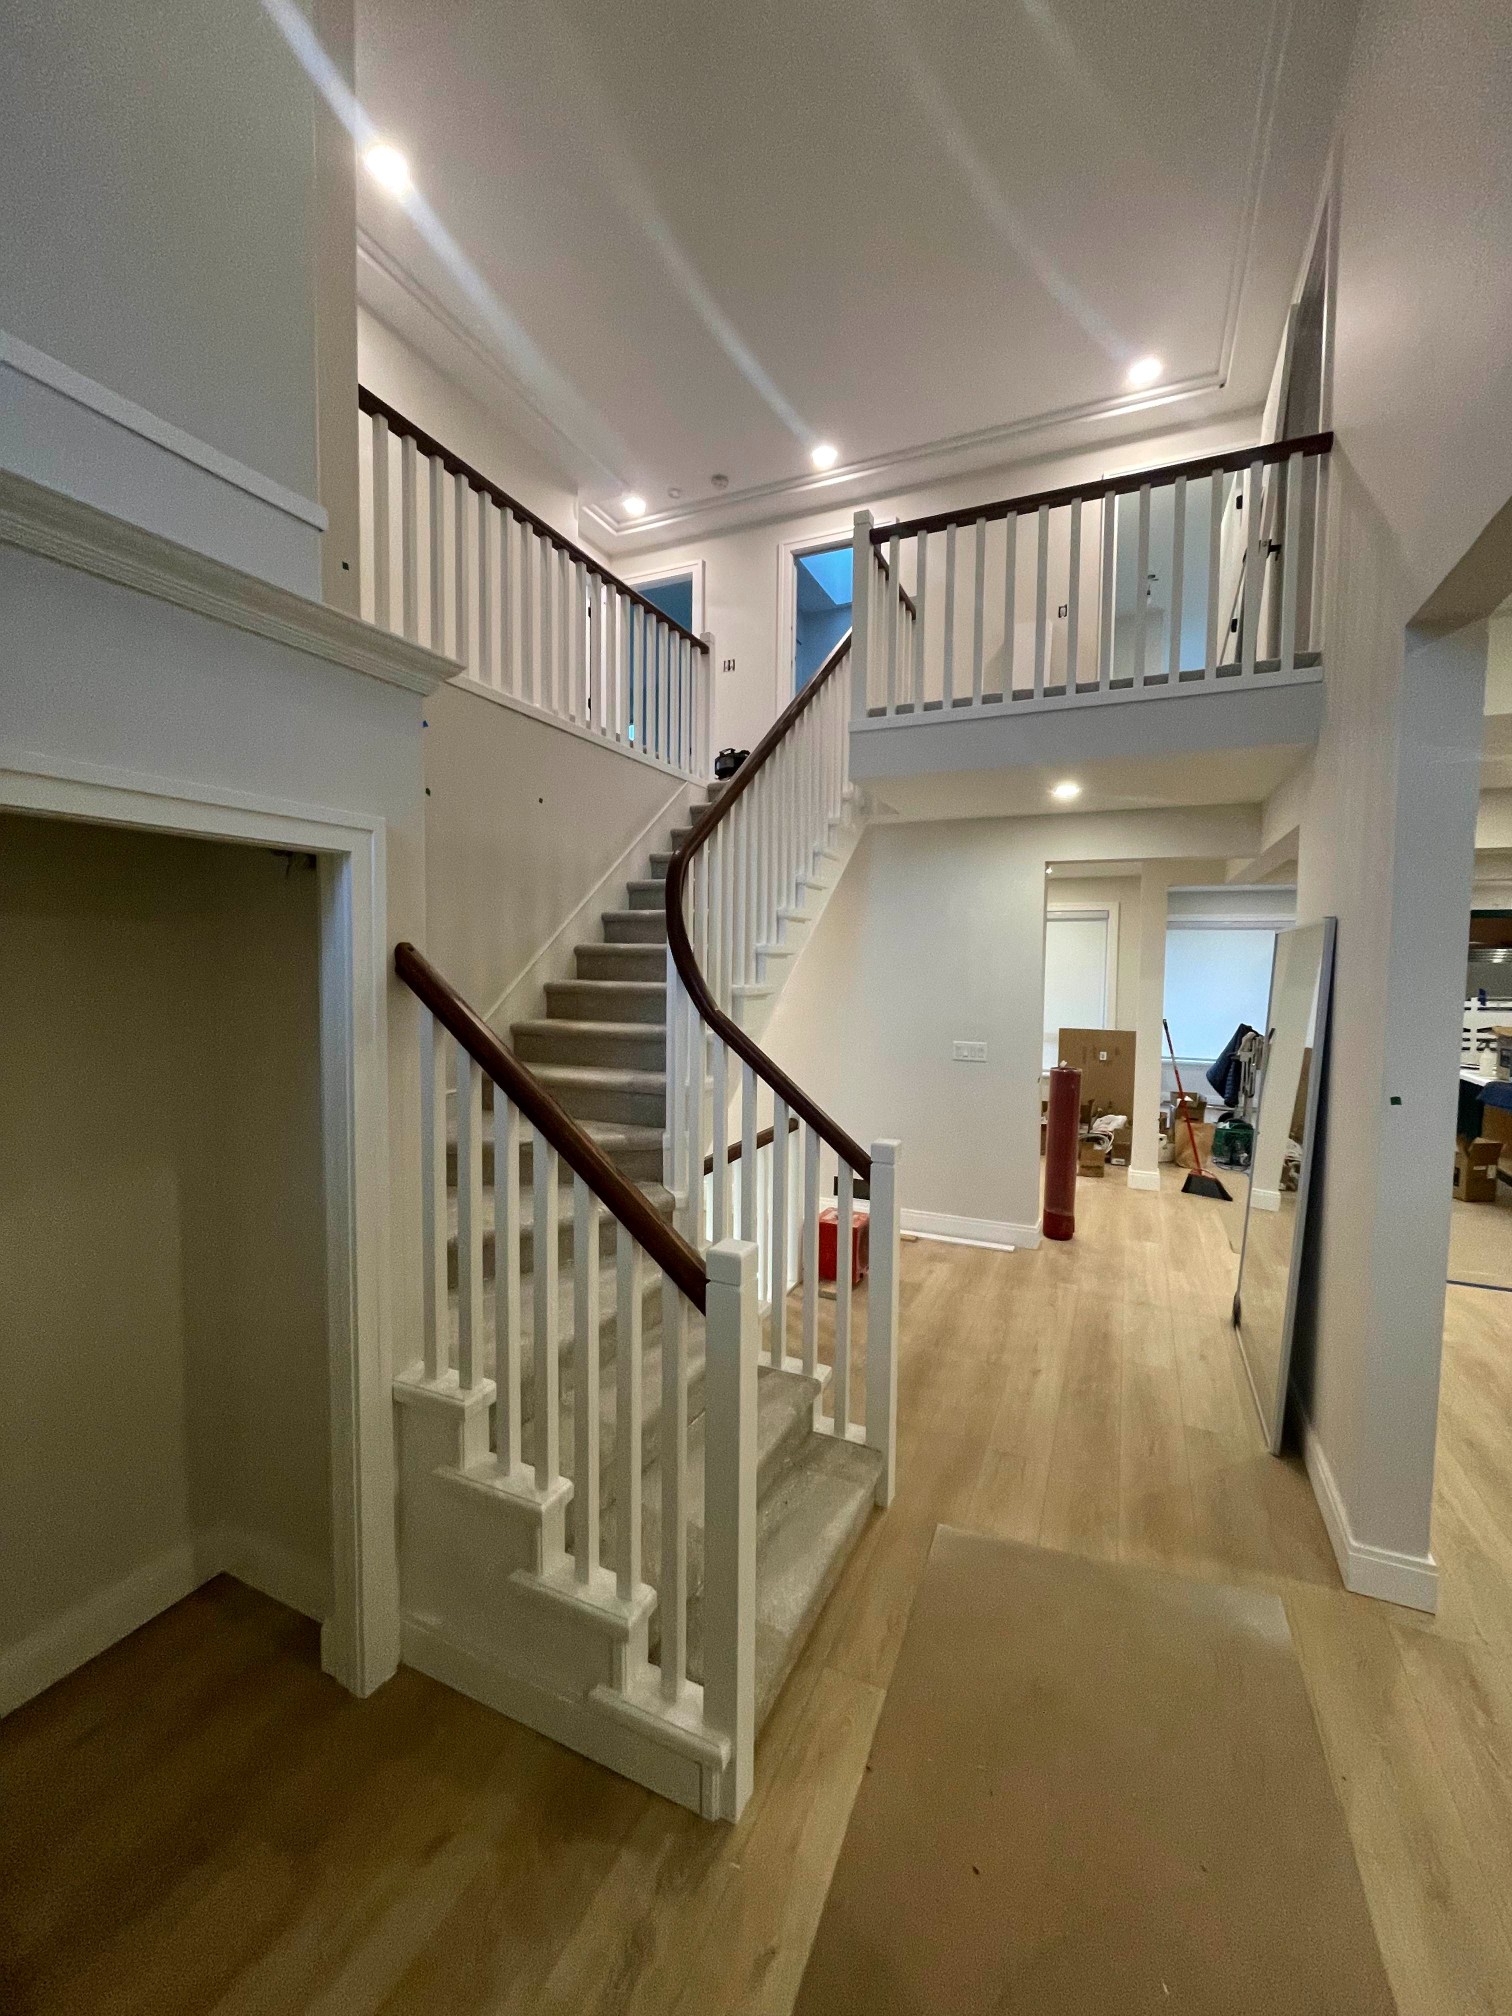 PRoject_Gallery_AFTER_interior_home_improvements_stair_handrailings